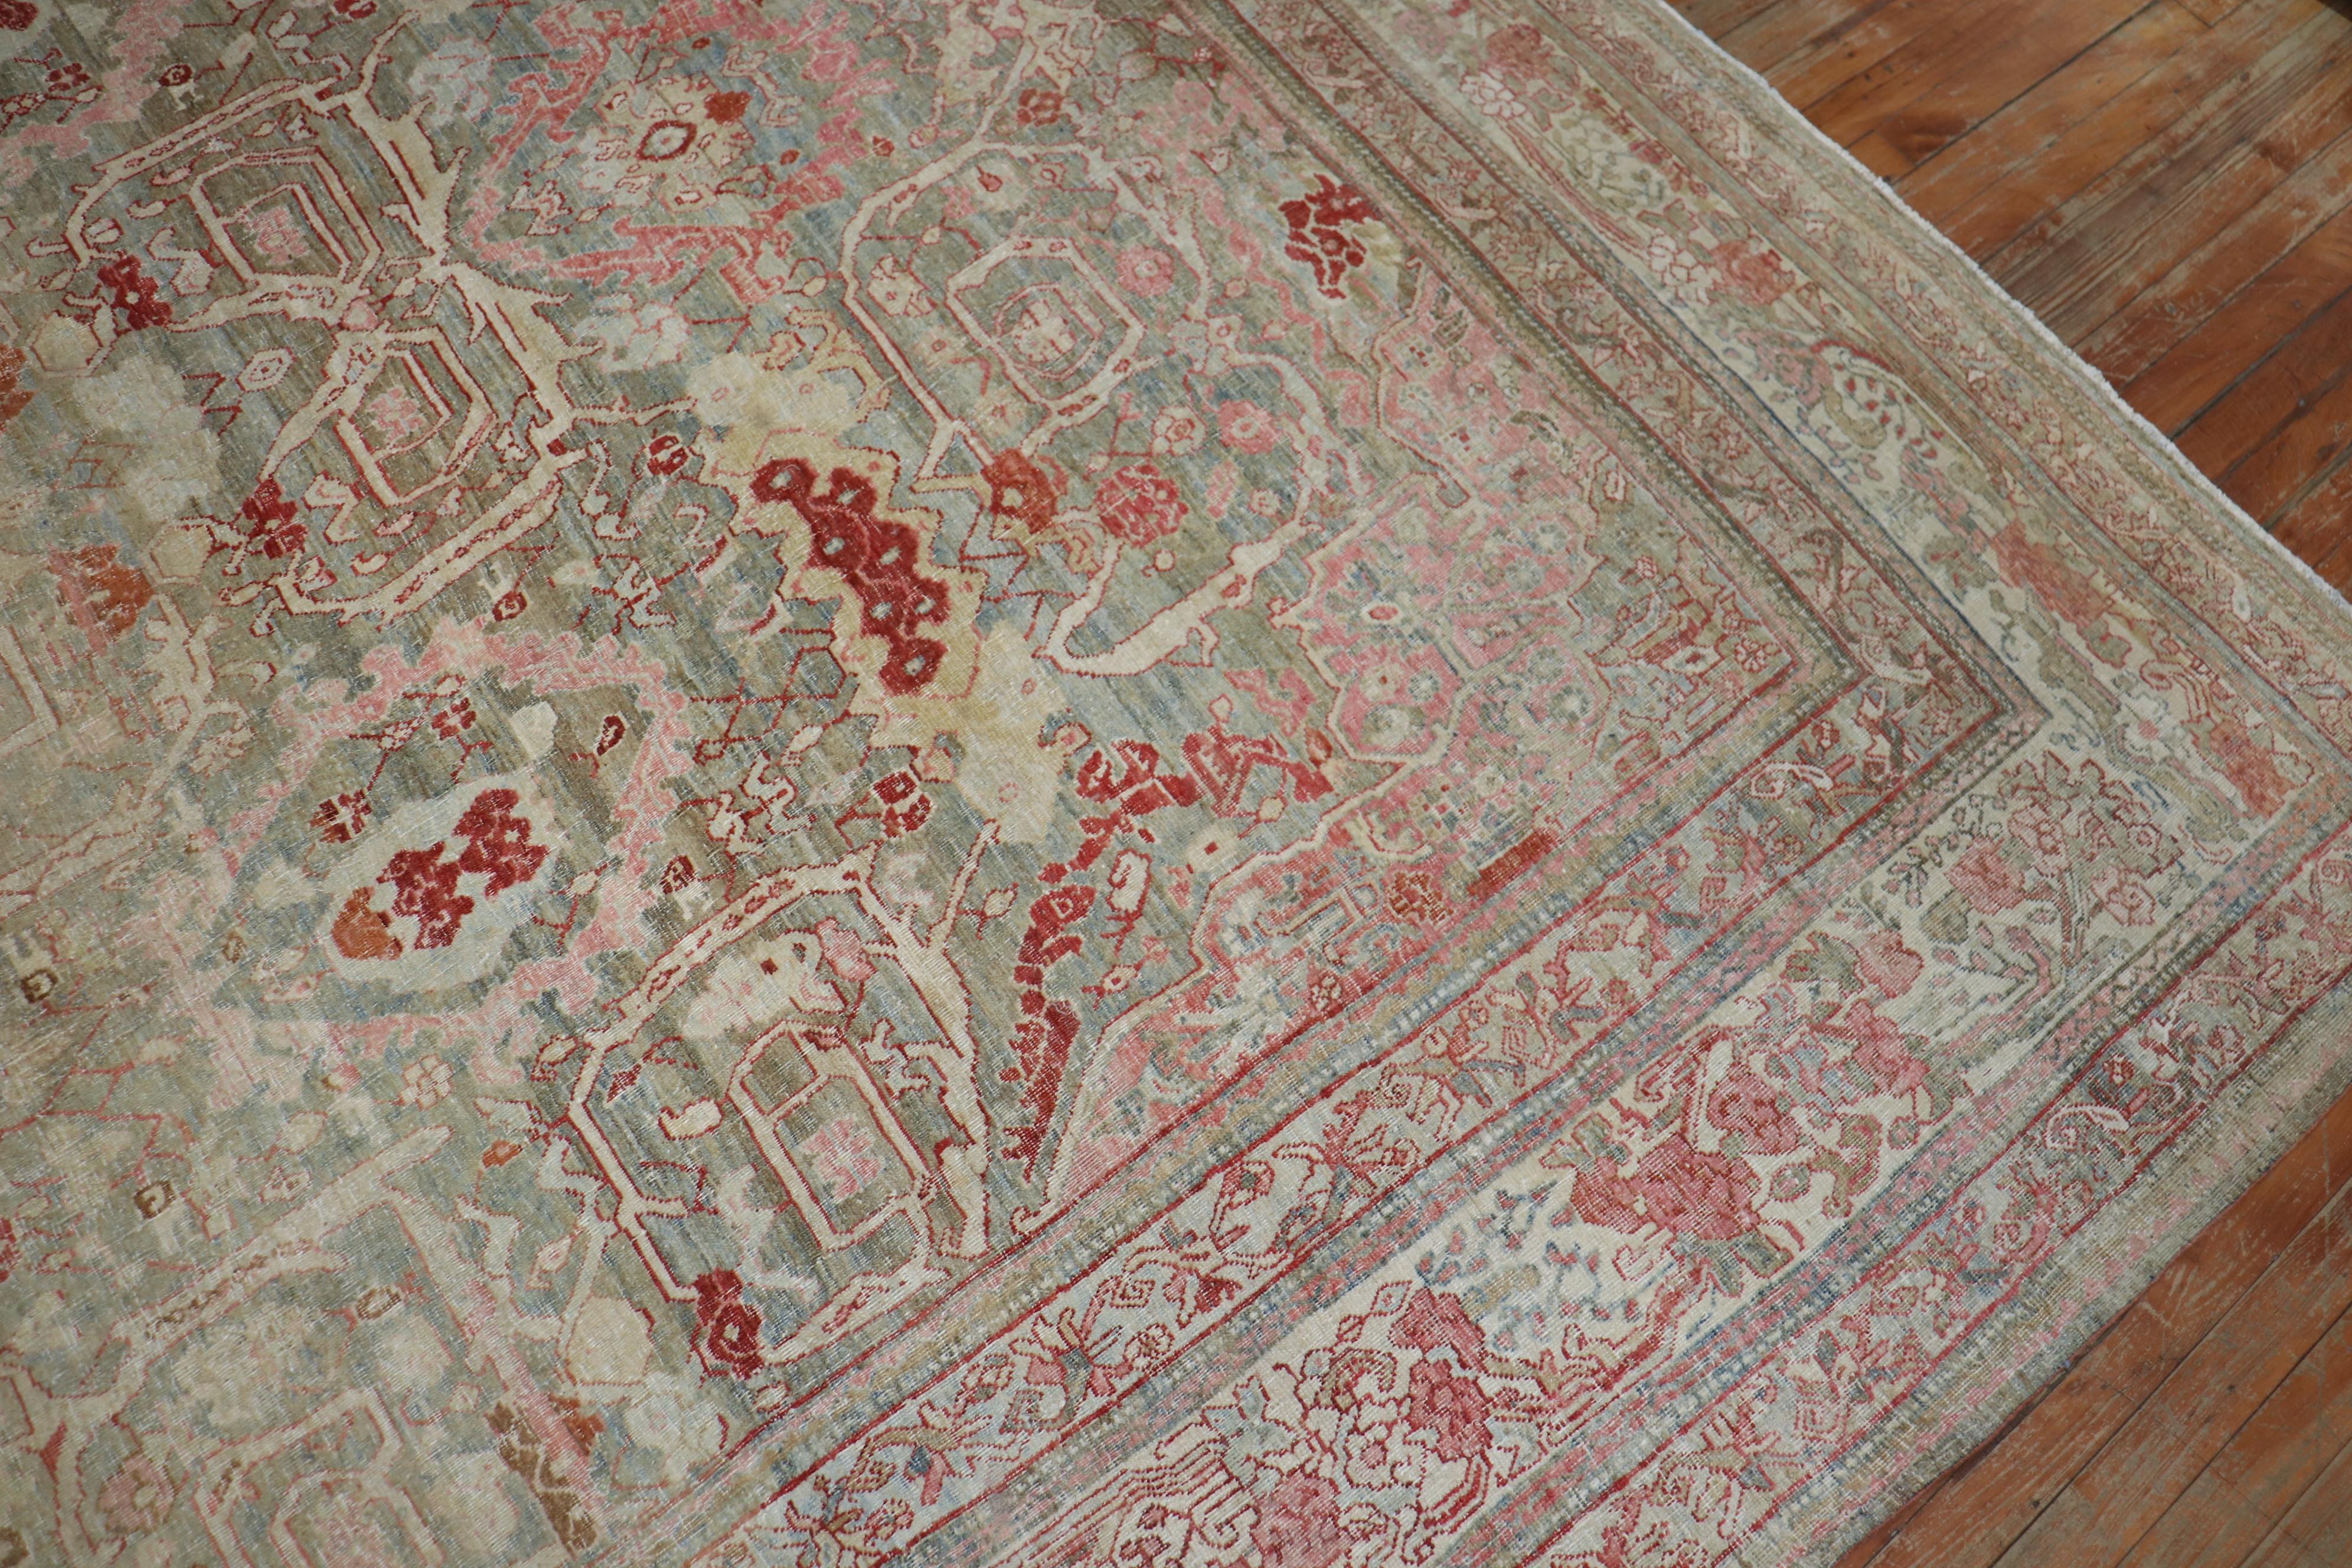 An early 20th century Persian Bidjar rug with a feminine motif with pink and rose accents on a grayish green striated field

Measures: 10'9